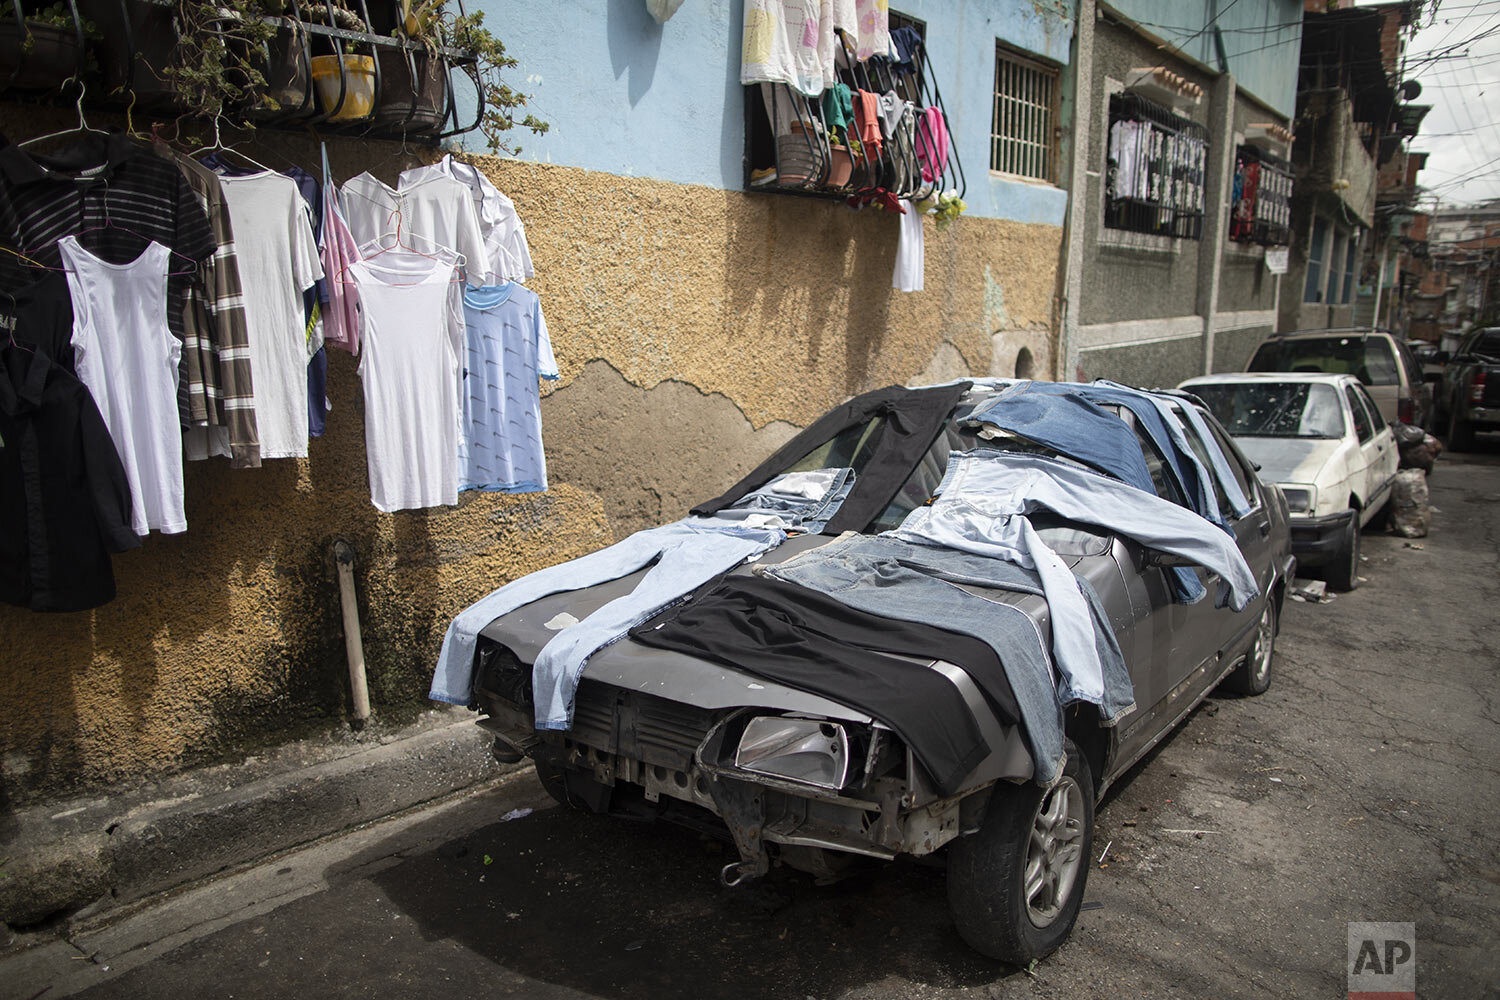  An out of commission car is used to dry laundry in the Petare neighborhood of Caracas, Venezuela, June 10, 2021. (AP Photo/Ariana Cubillos) 